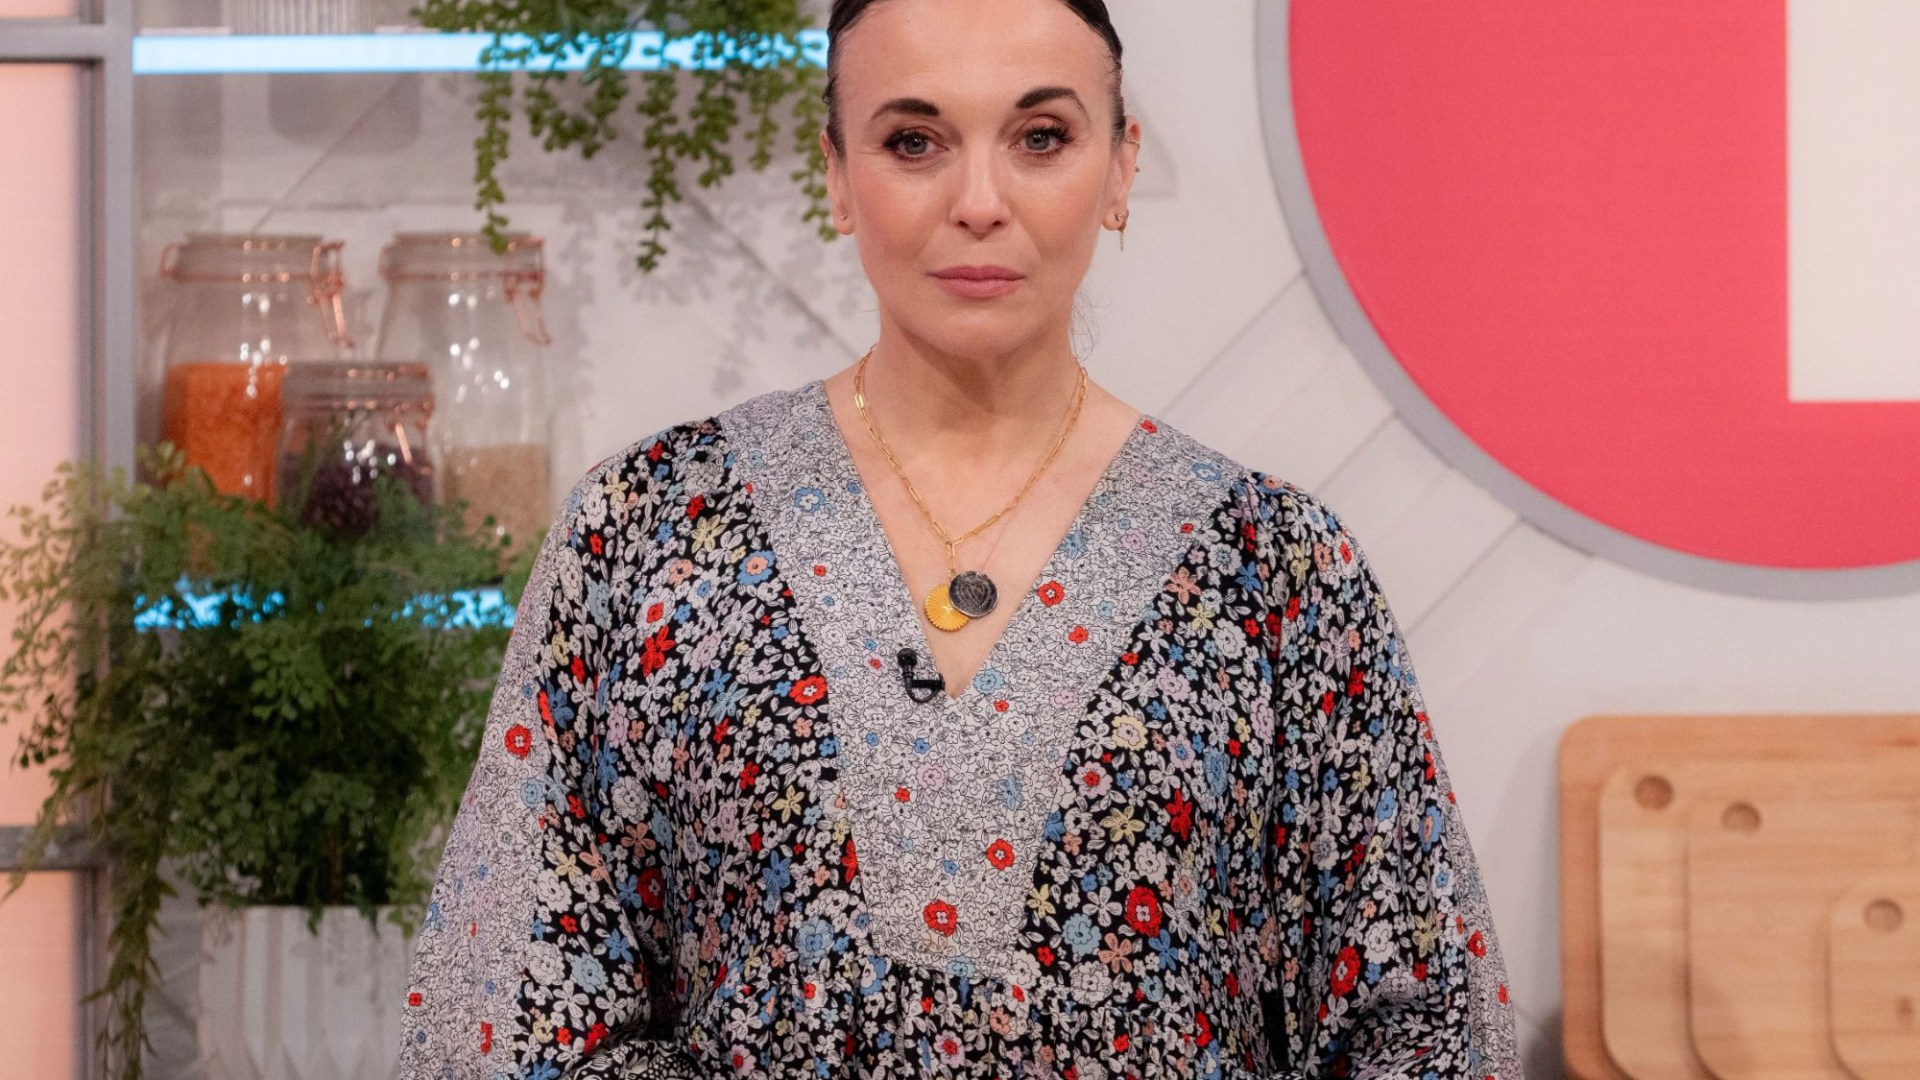 Amanda Abbington claims she told Strictly bosses ‘Giovanni Pernice HATES me’ in first week and reveals ‘nasty’ behaviour [Video]